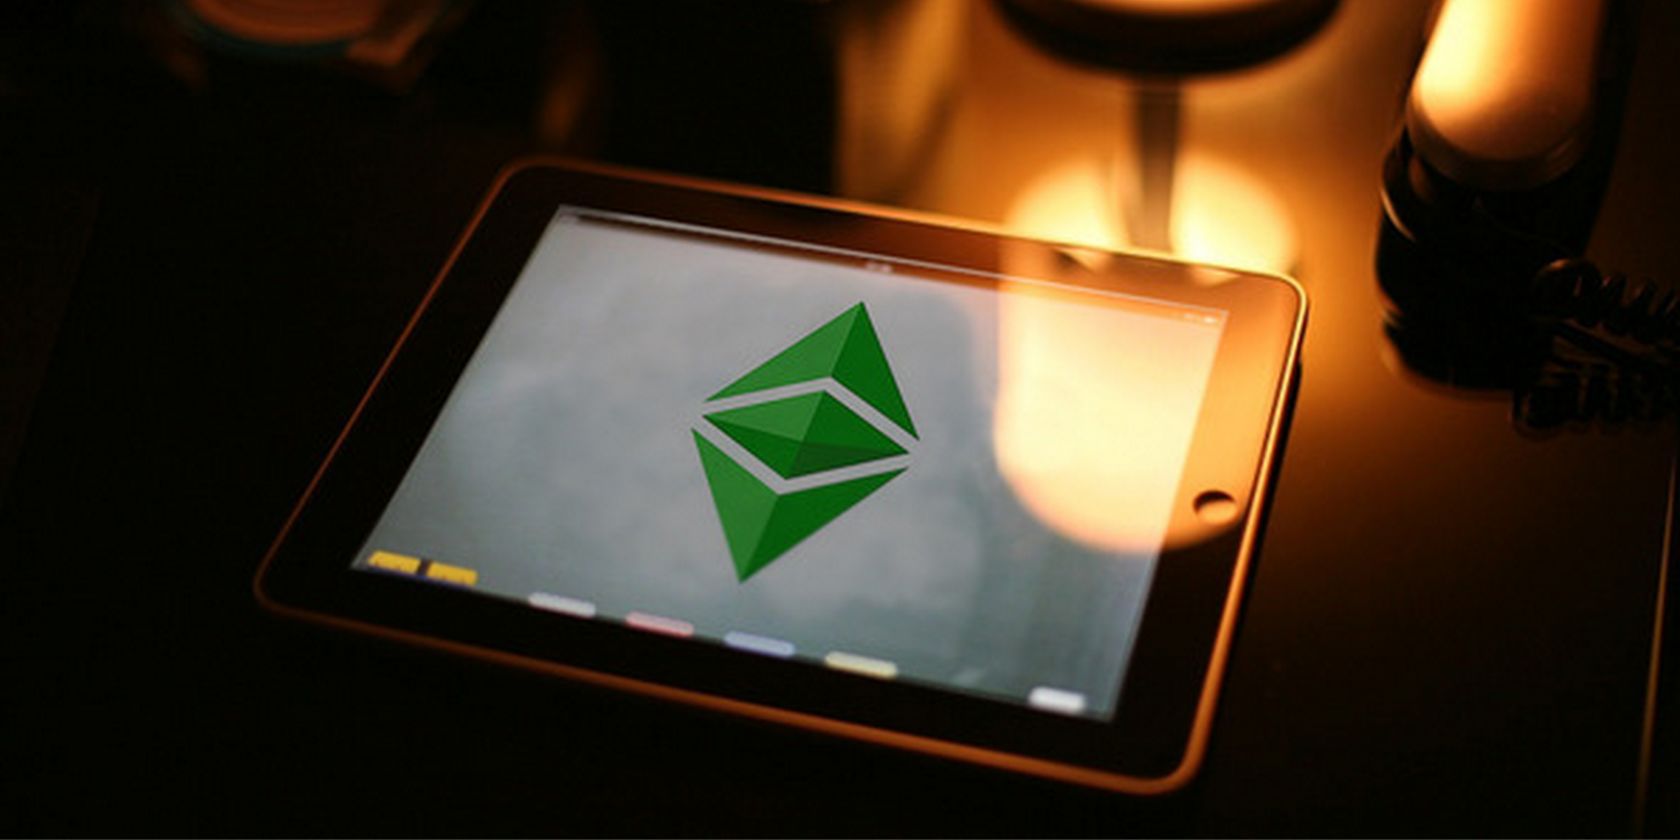 ethereum classic logo on tablet